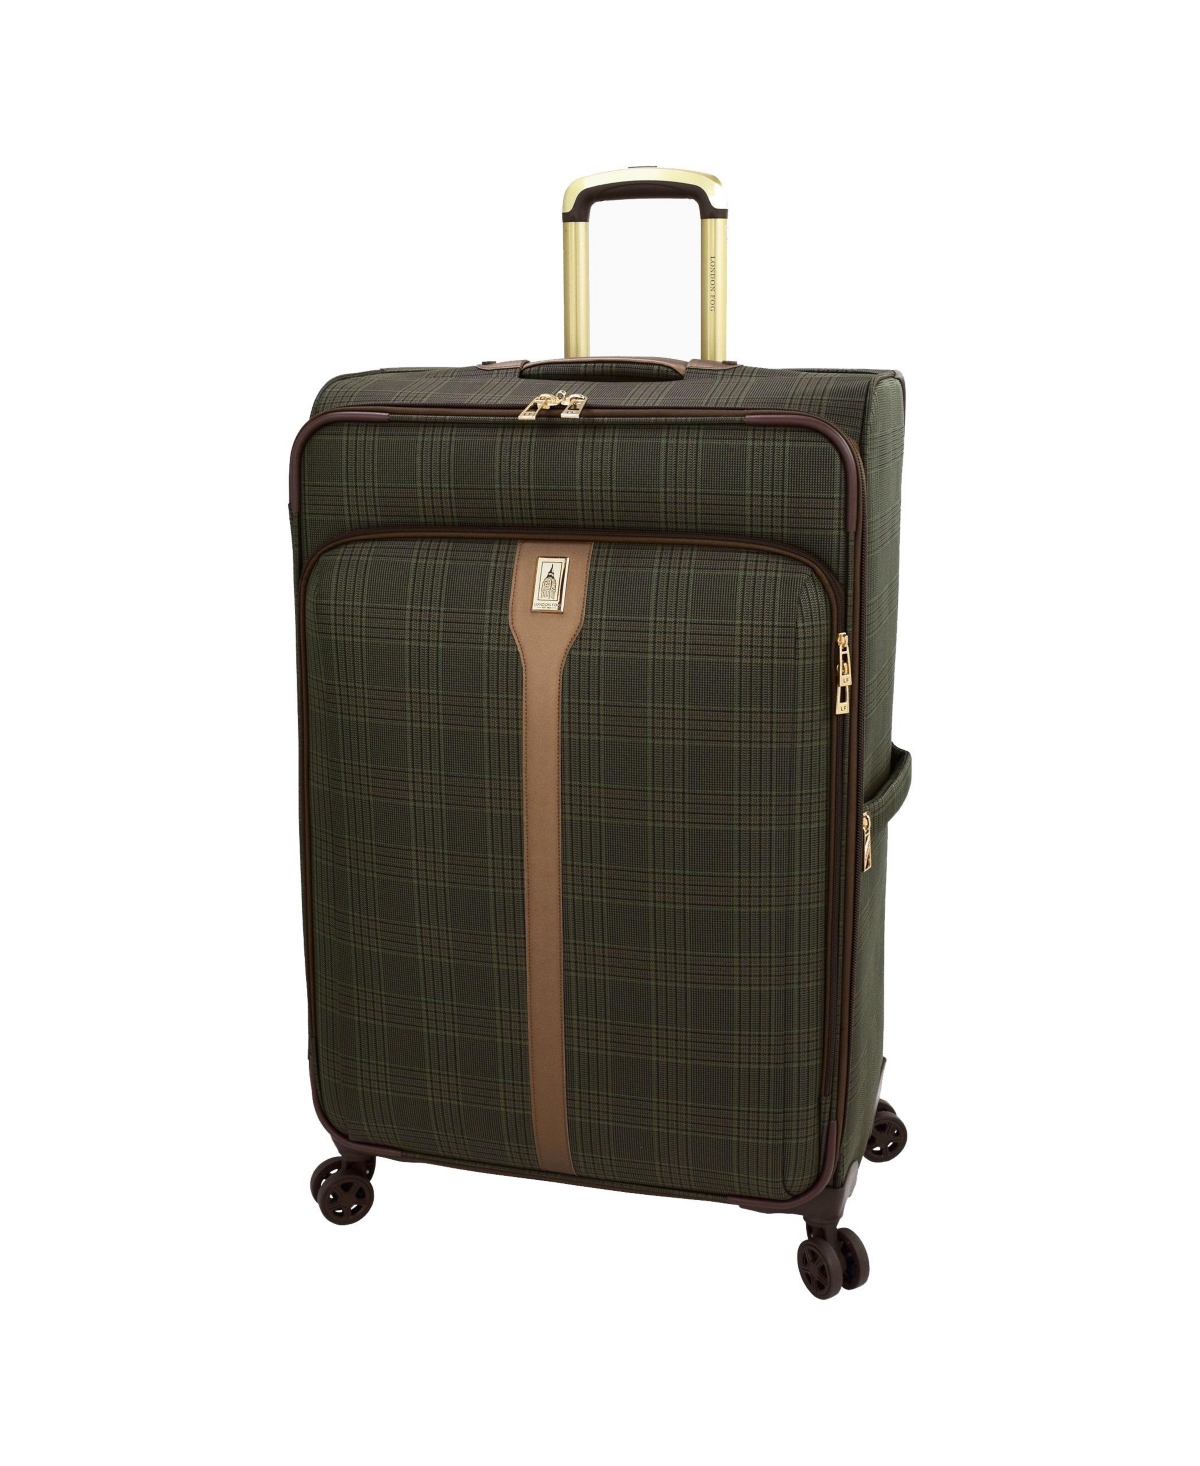 Brentwood Iii 29" Expandable Spinner Soft Side, Created for Macy's - Navy, Bronze